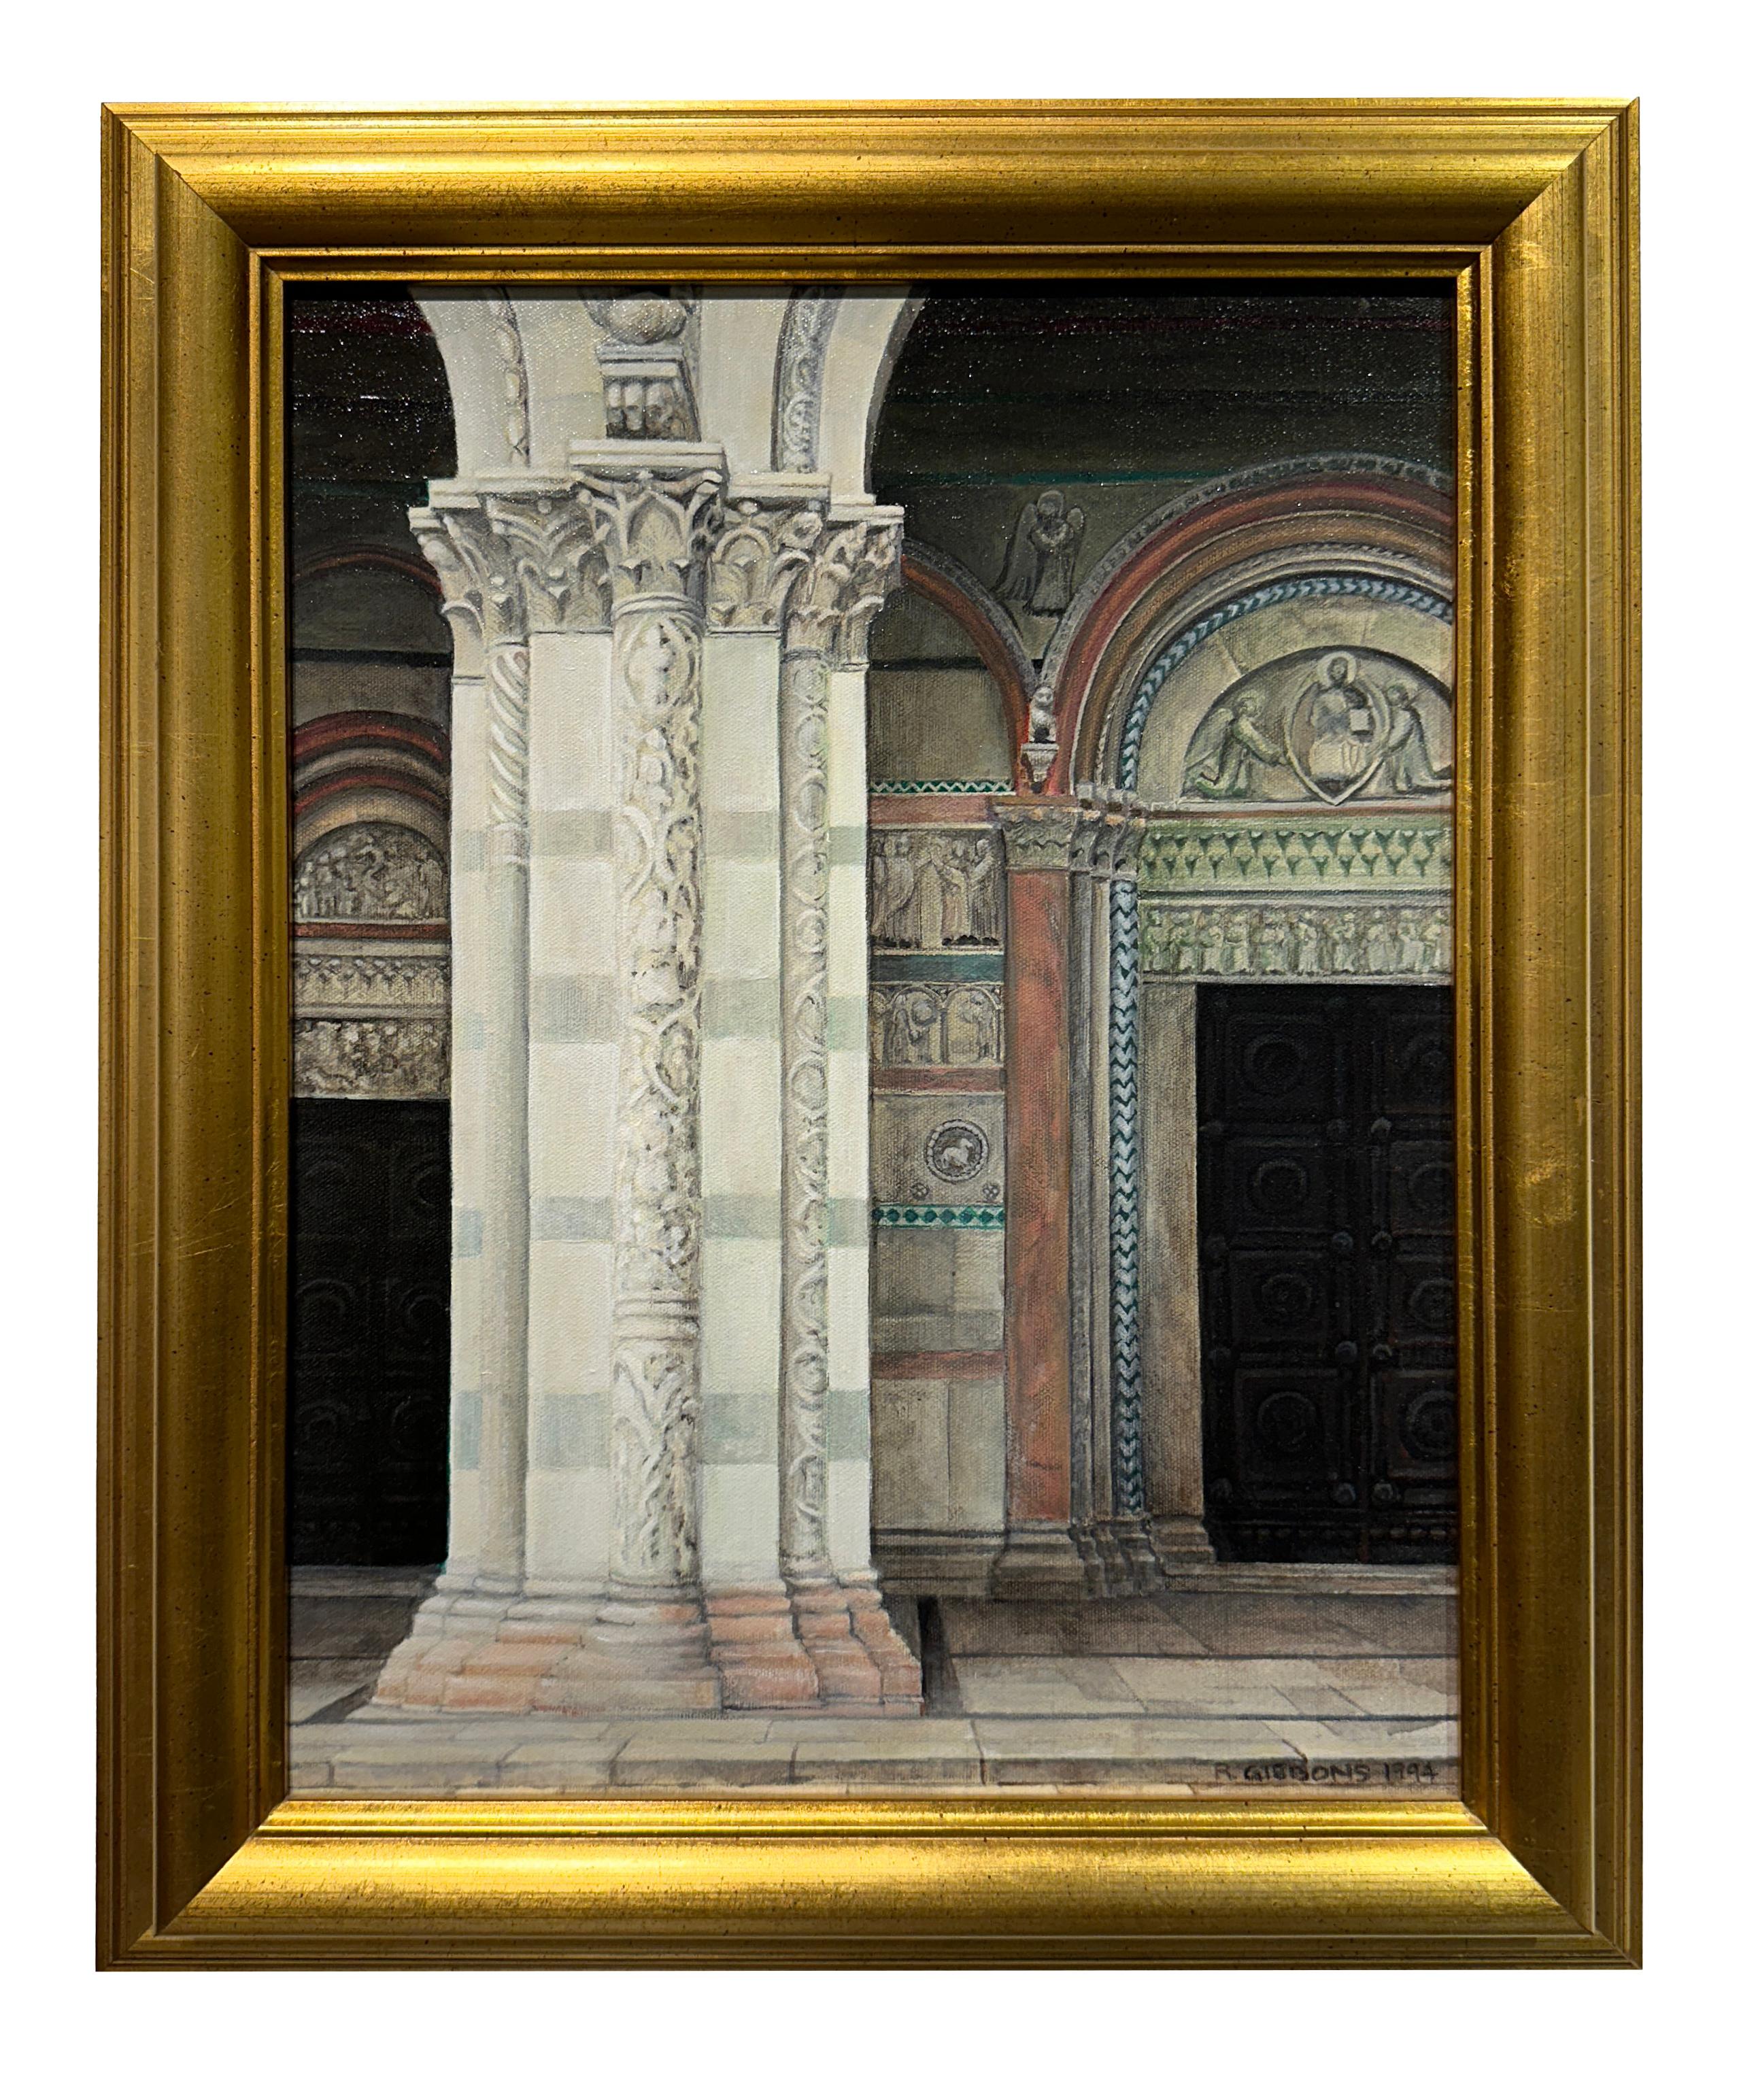 Richard Gibbons Landscape Painting - Duomo, Lucca Italy - Architectural Interior, Framed, Original Oil on Canvas